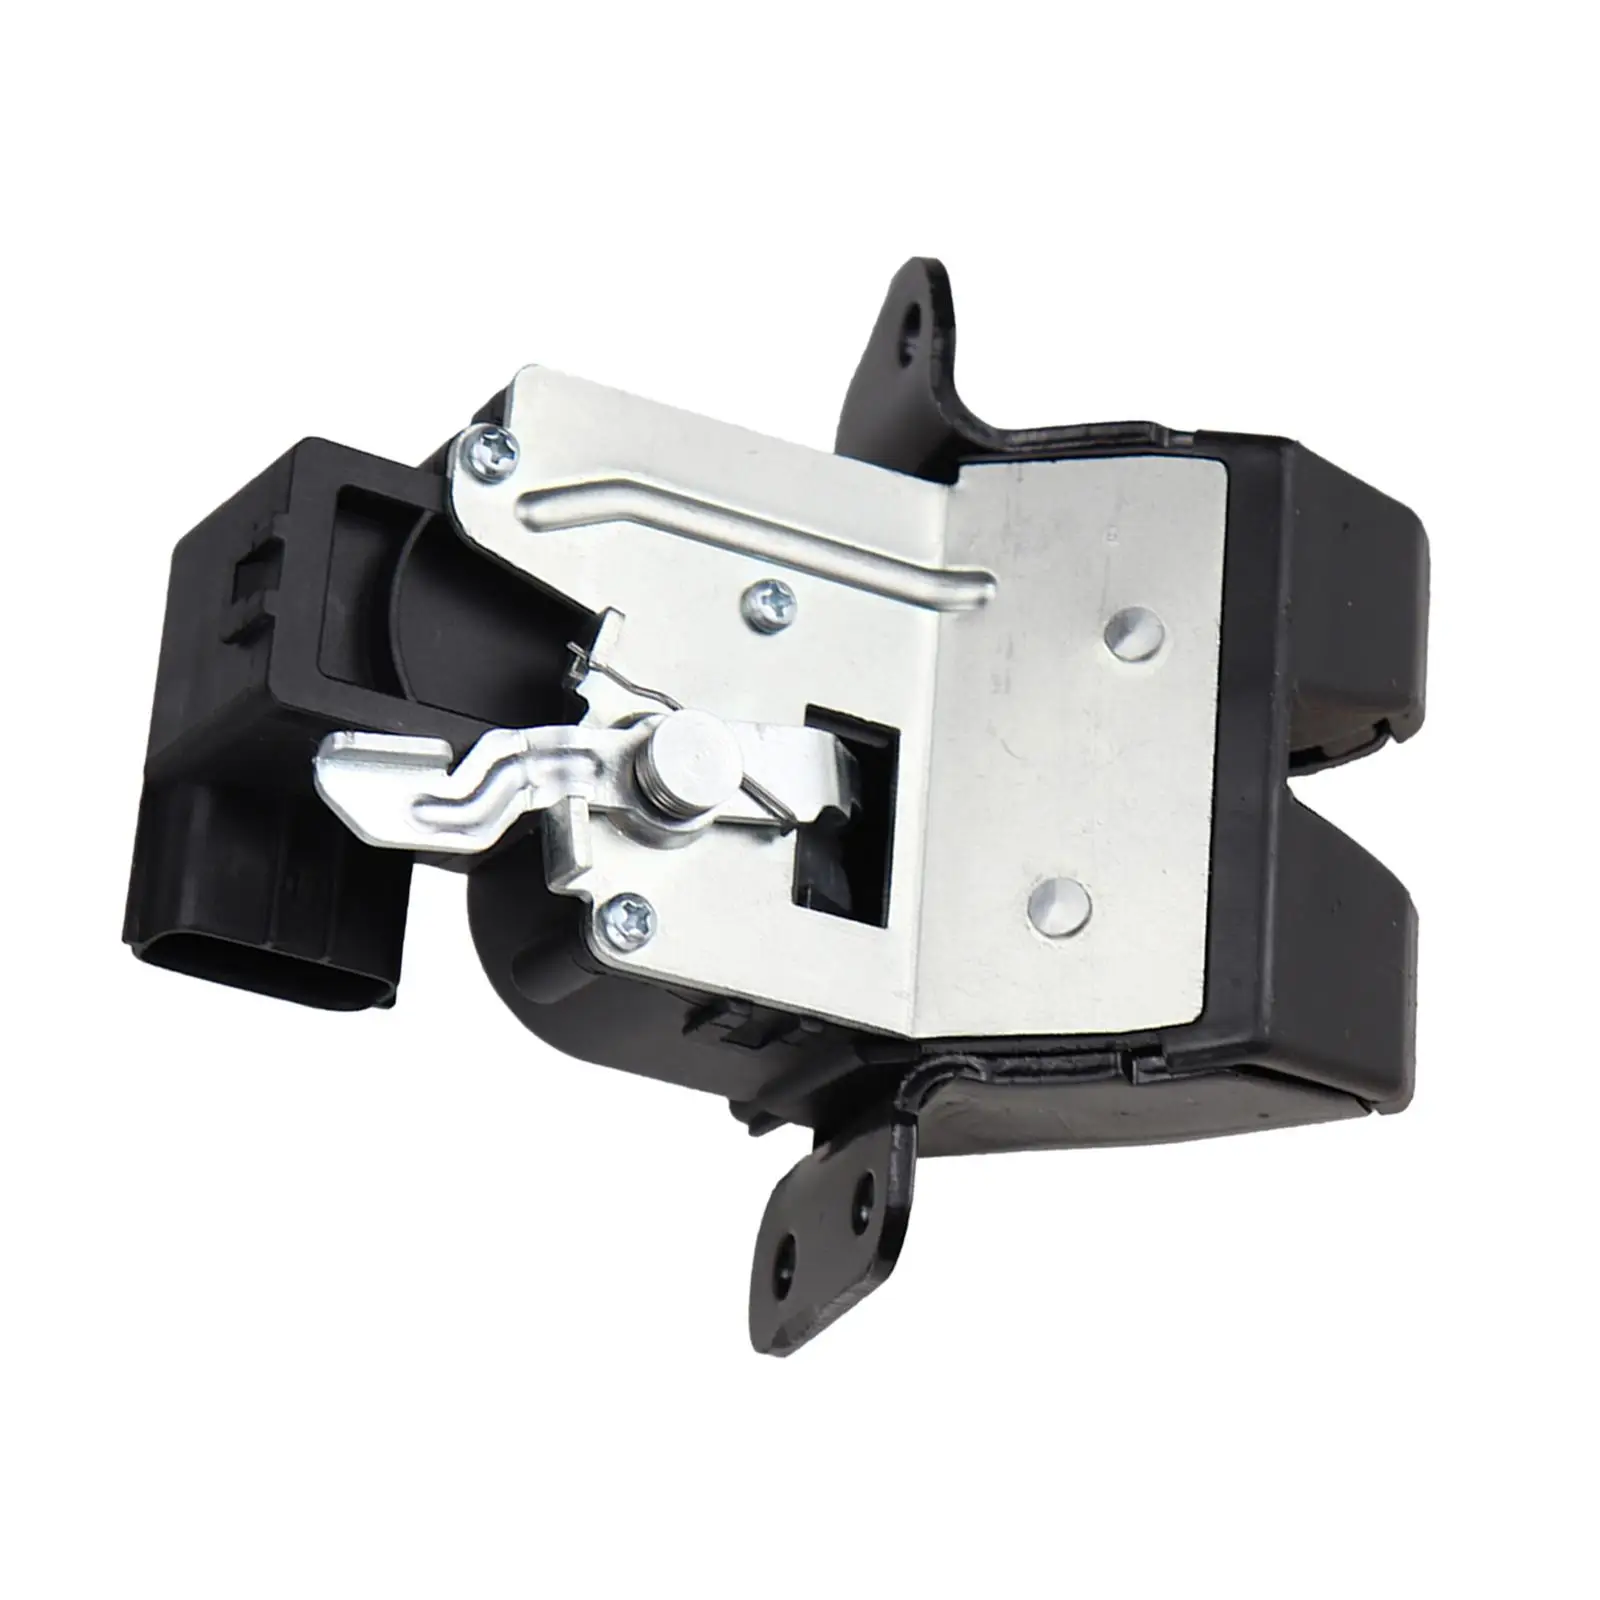 Tailgate Trunk Door Lock Actuator 81230A5000 for   GT i30 Replace Accessories Parts  Install